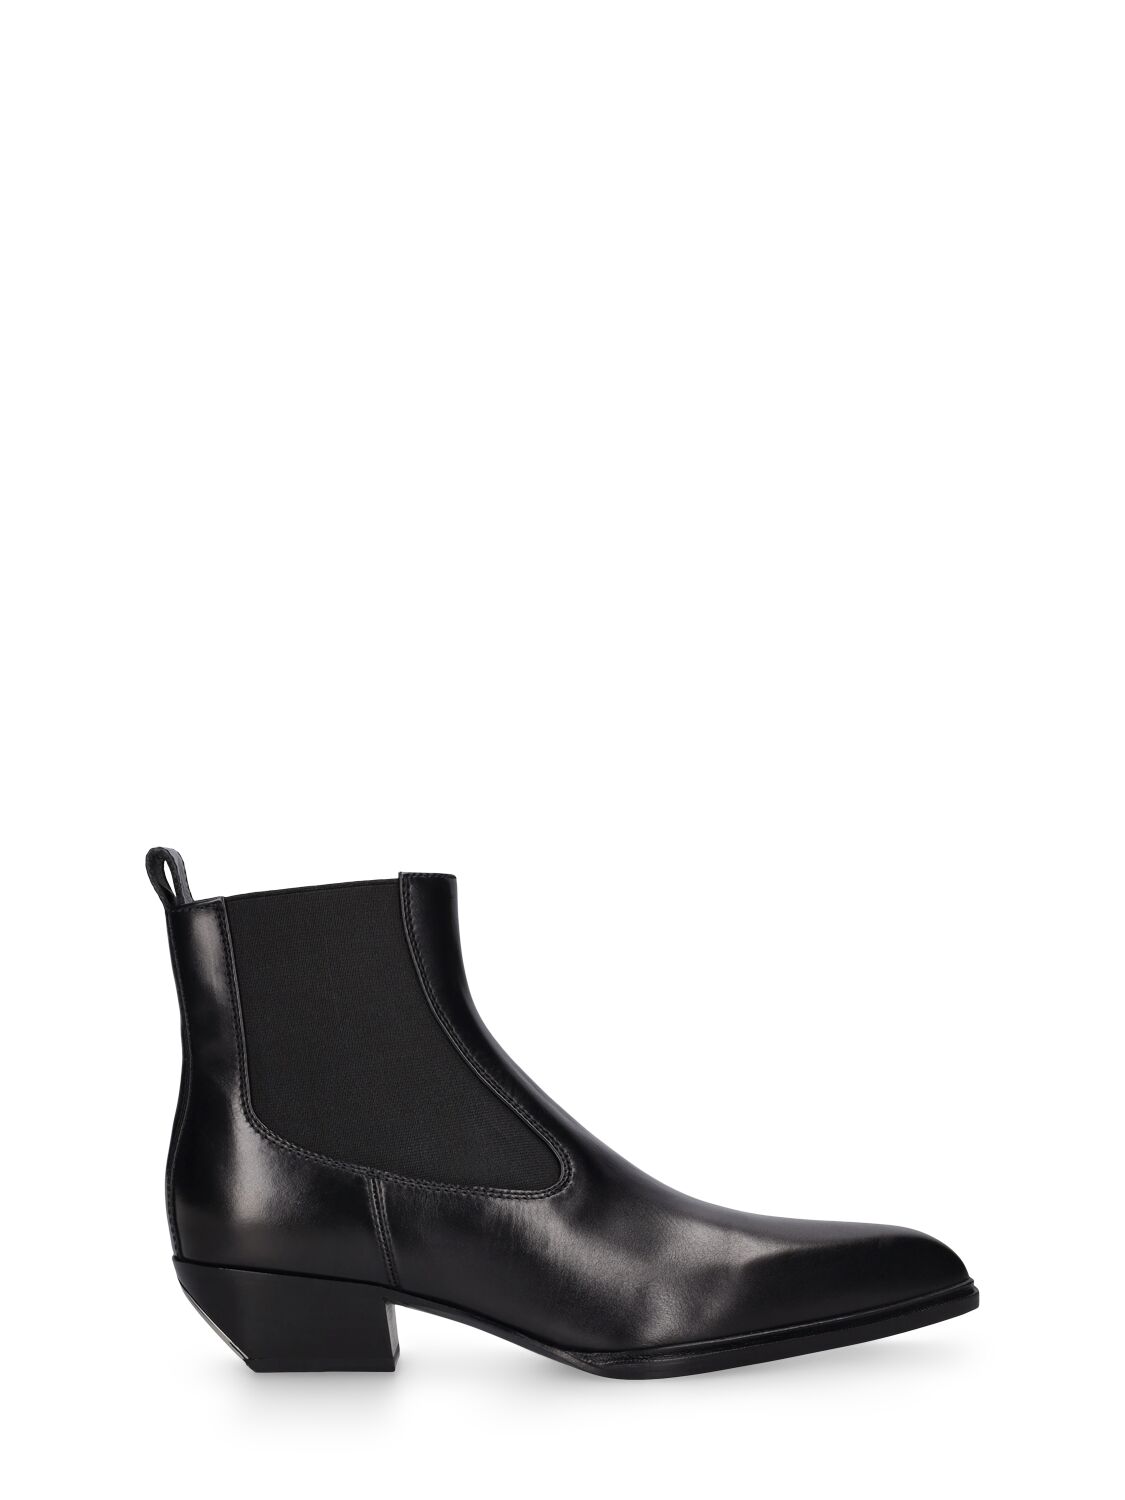 Alexander Wang 40mm Slick Leather Ankle Boots In Black